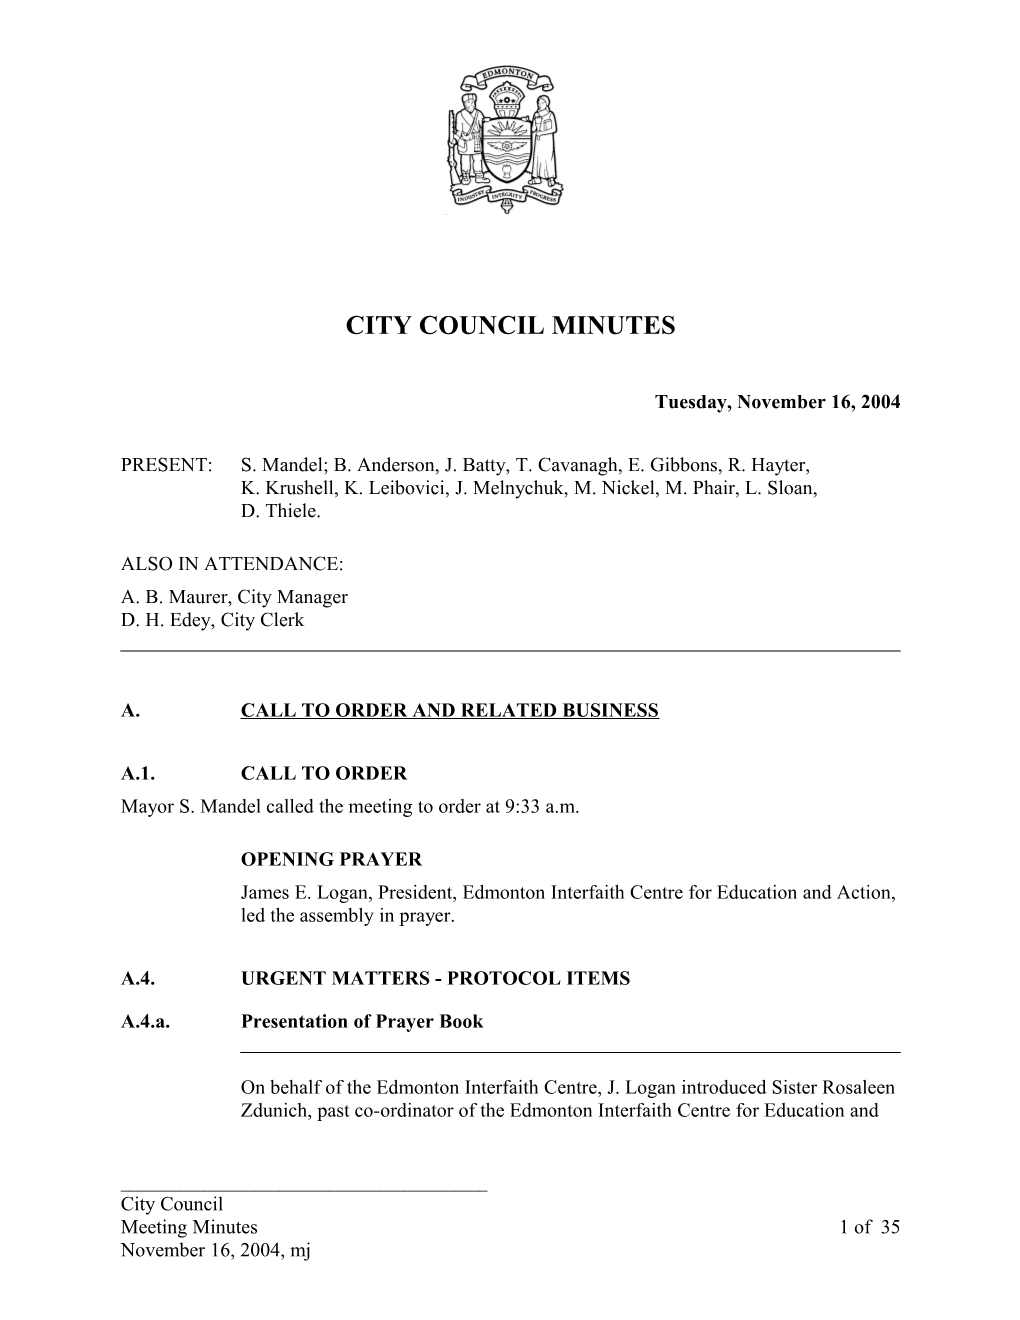 Minutes for City Council November 16, 2004 Meeting